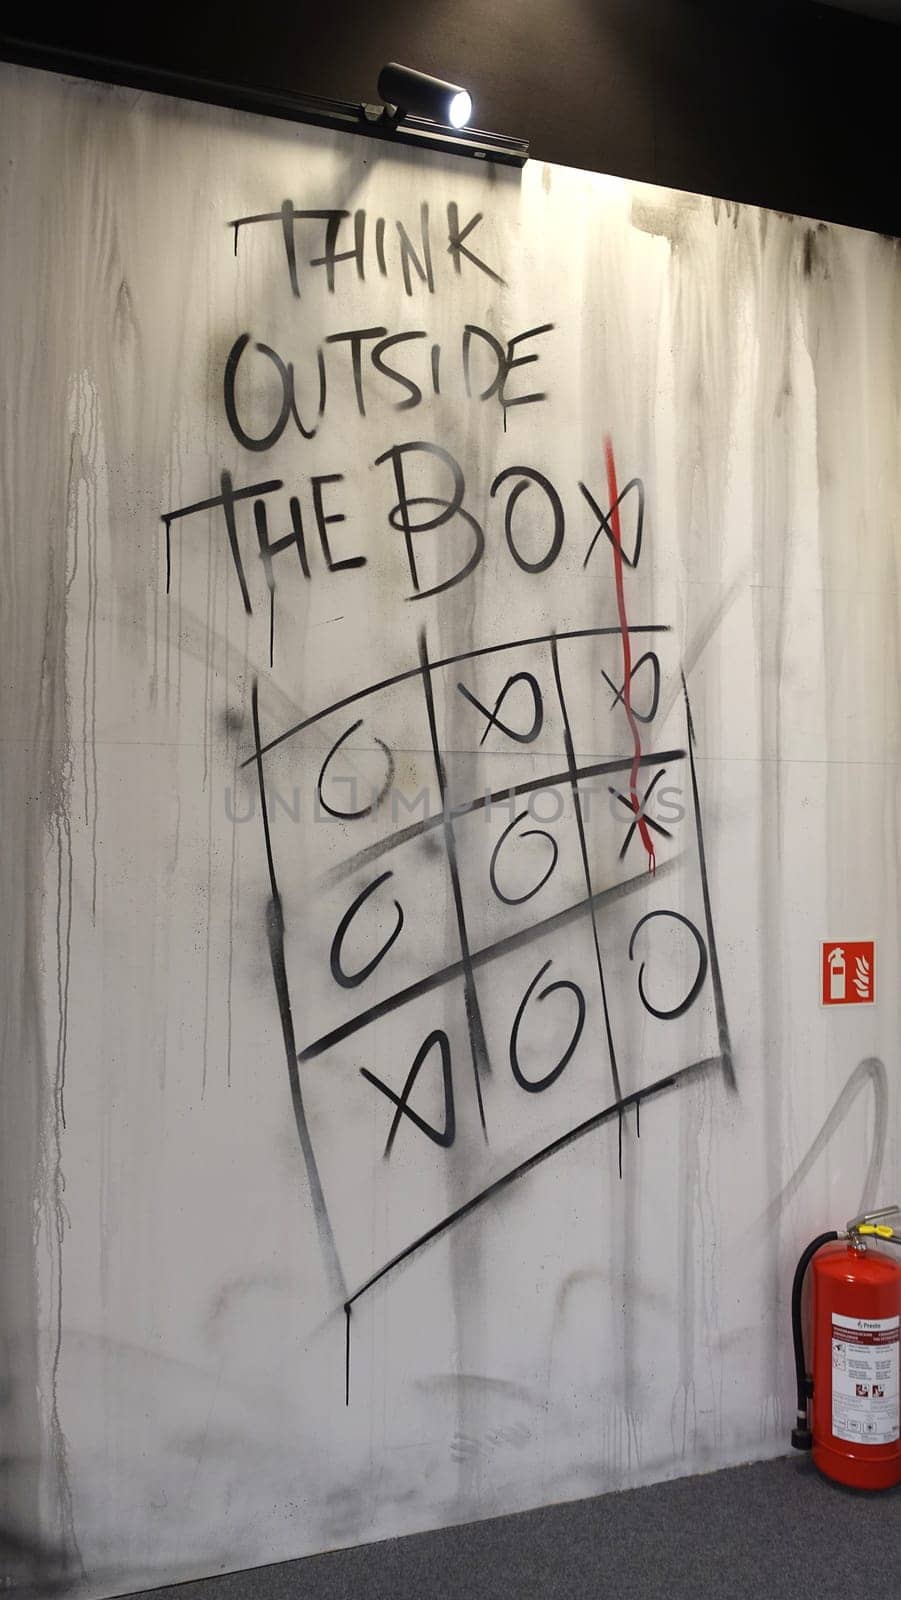 Stockholm, Sweden, December 29 2023. Art exhibition. The mystery of Banksy. A genius mind. Outside the box.